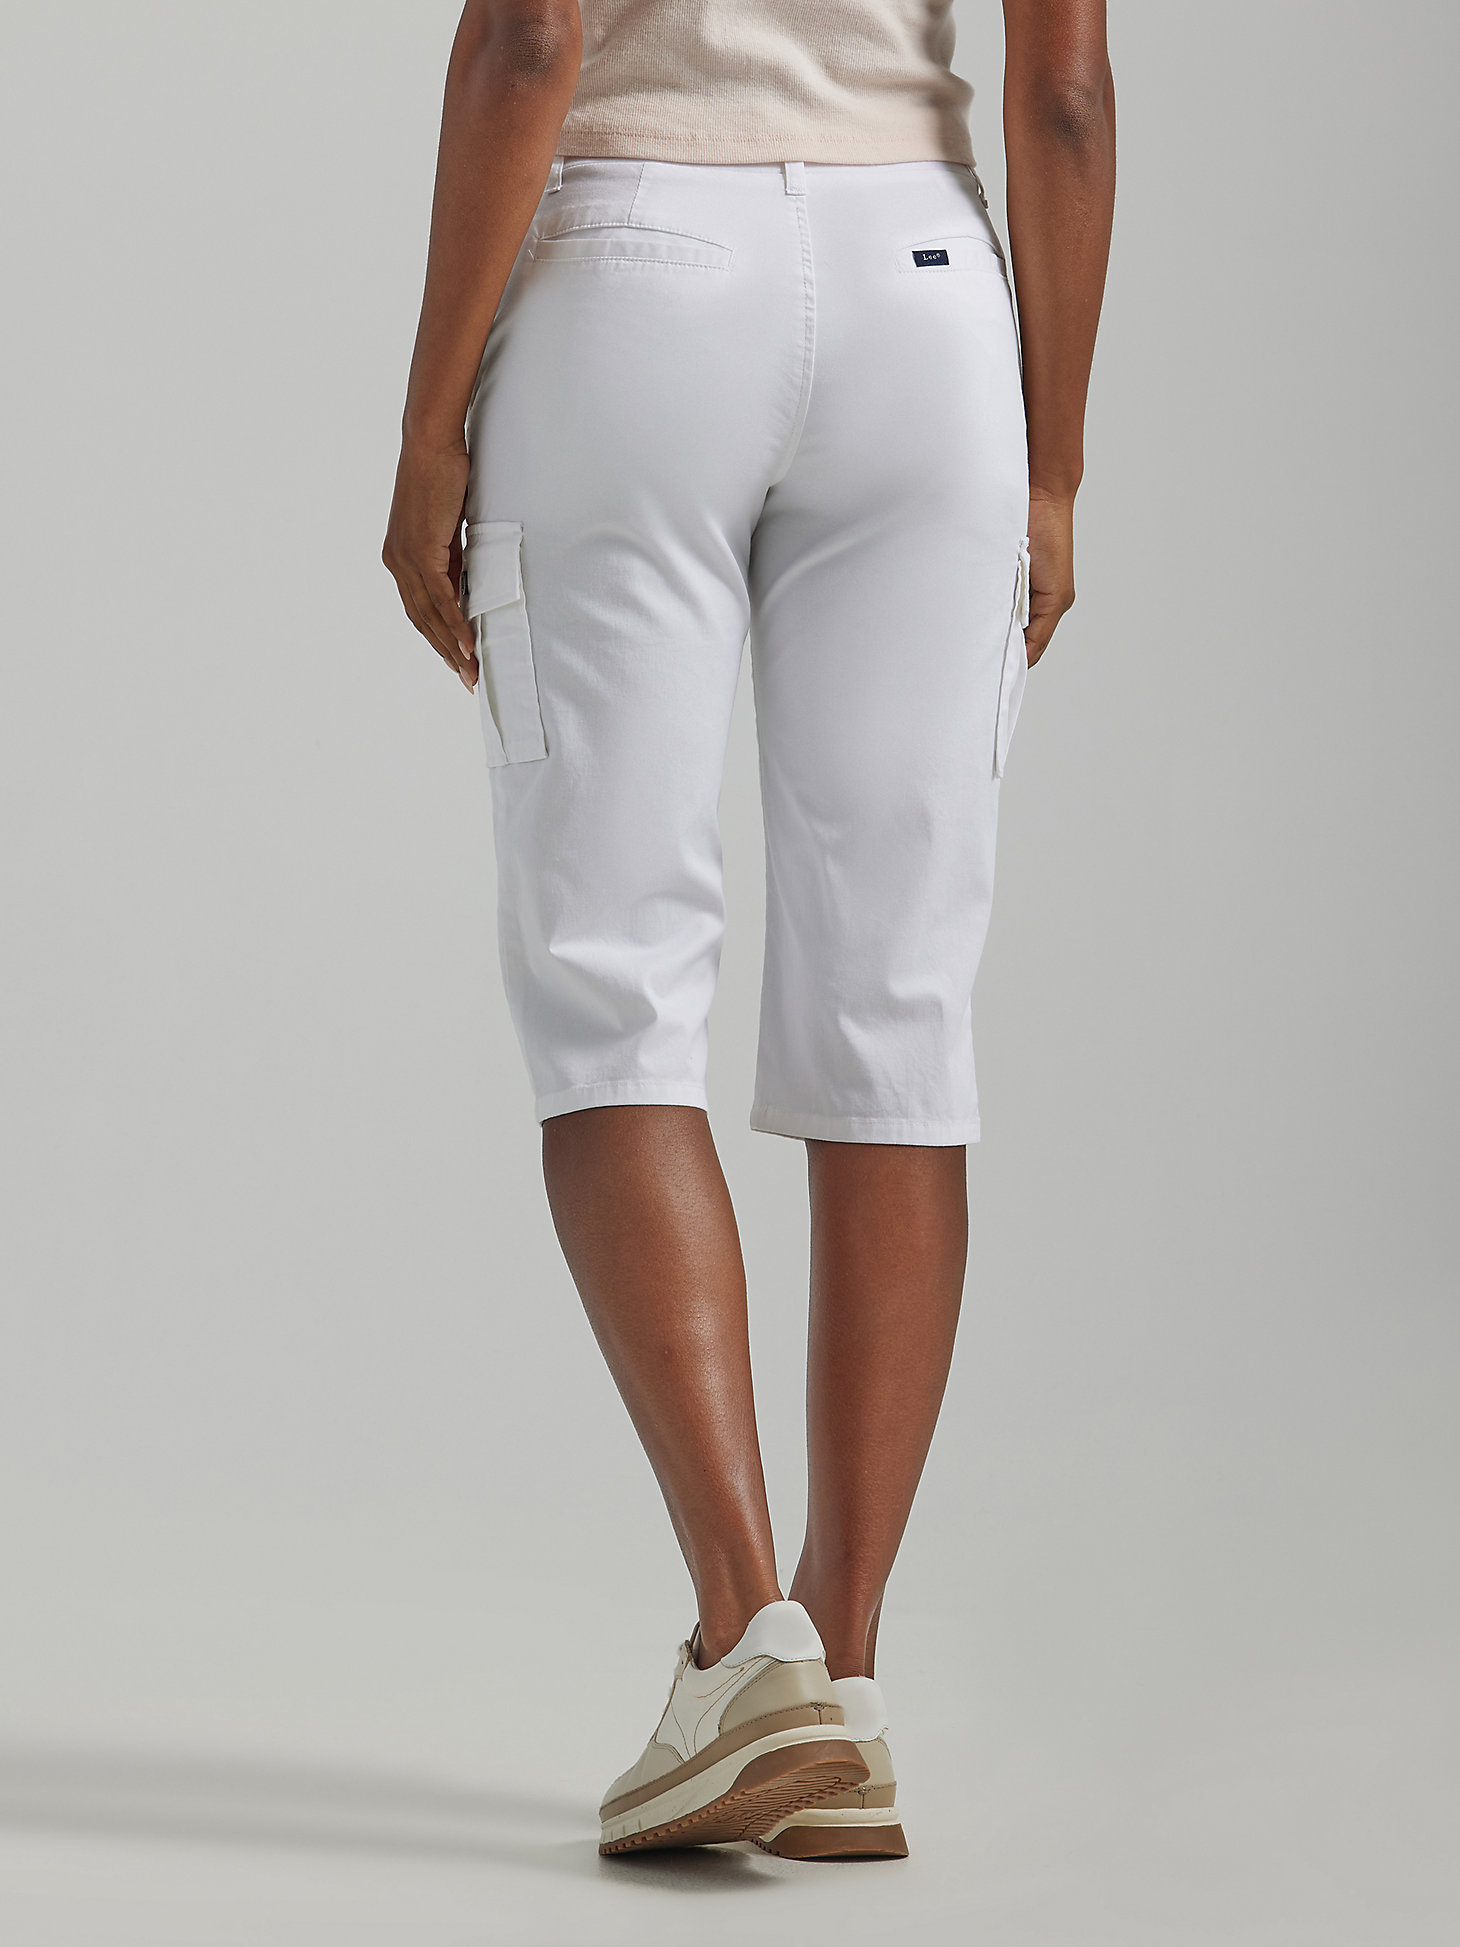 Women's Ultra Lux with Flex-to-Go Relaxed Cargo Skimmer (Petite) in White alternative view 1